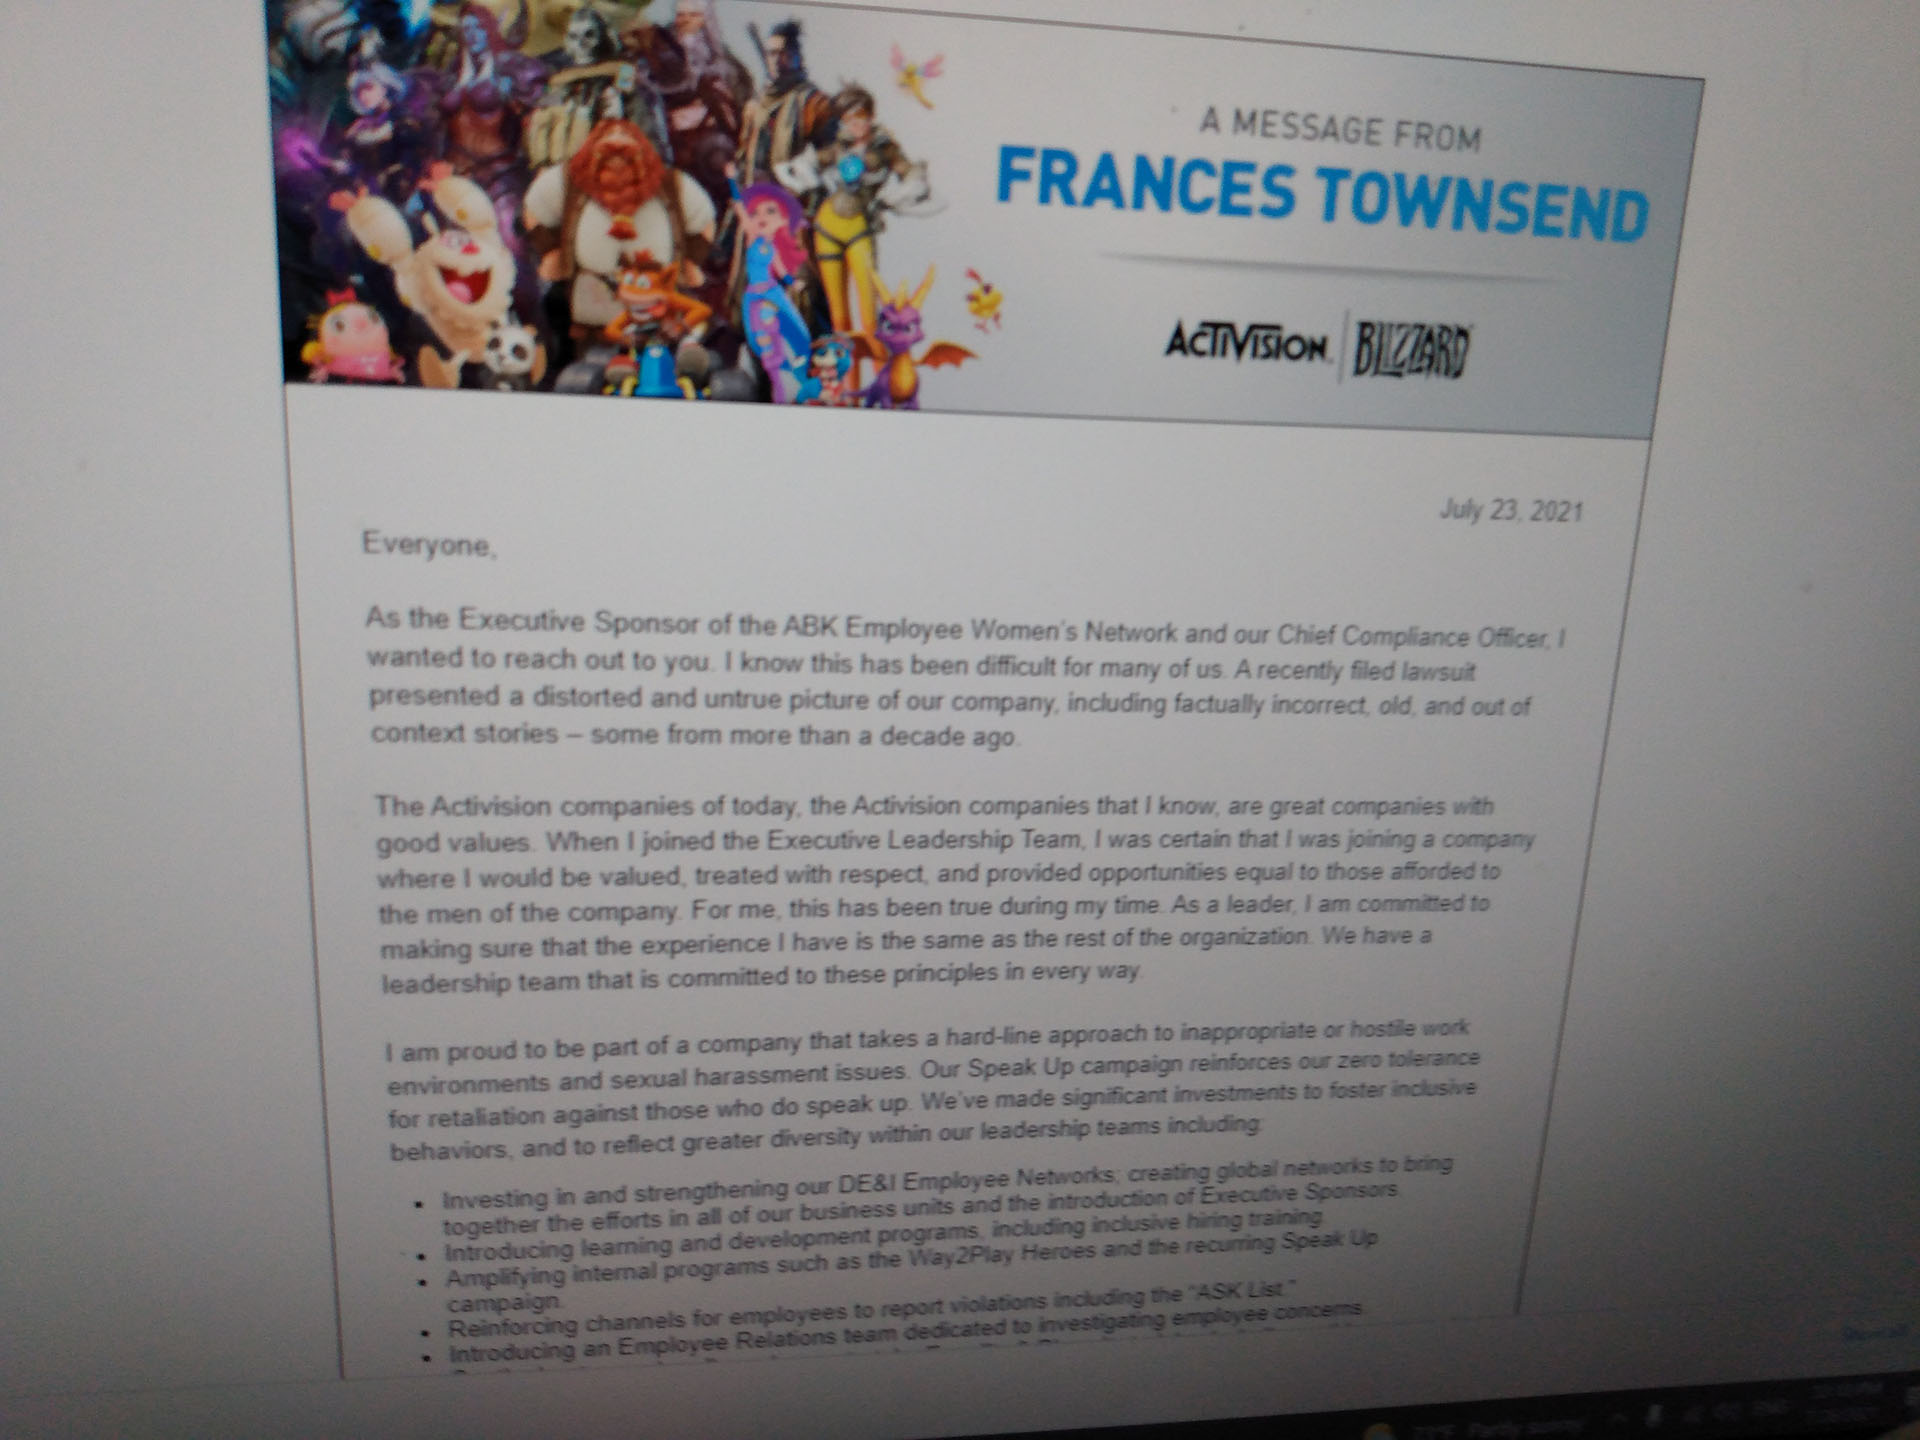 Photo of the email statement from Fran Townsend